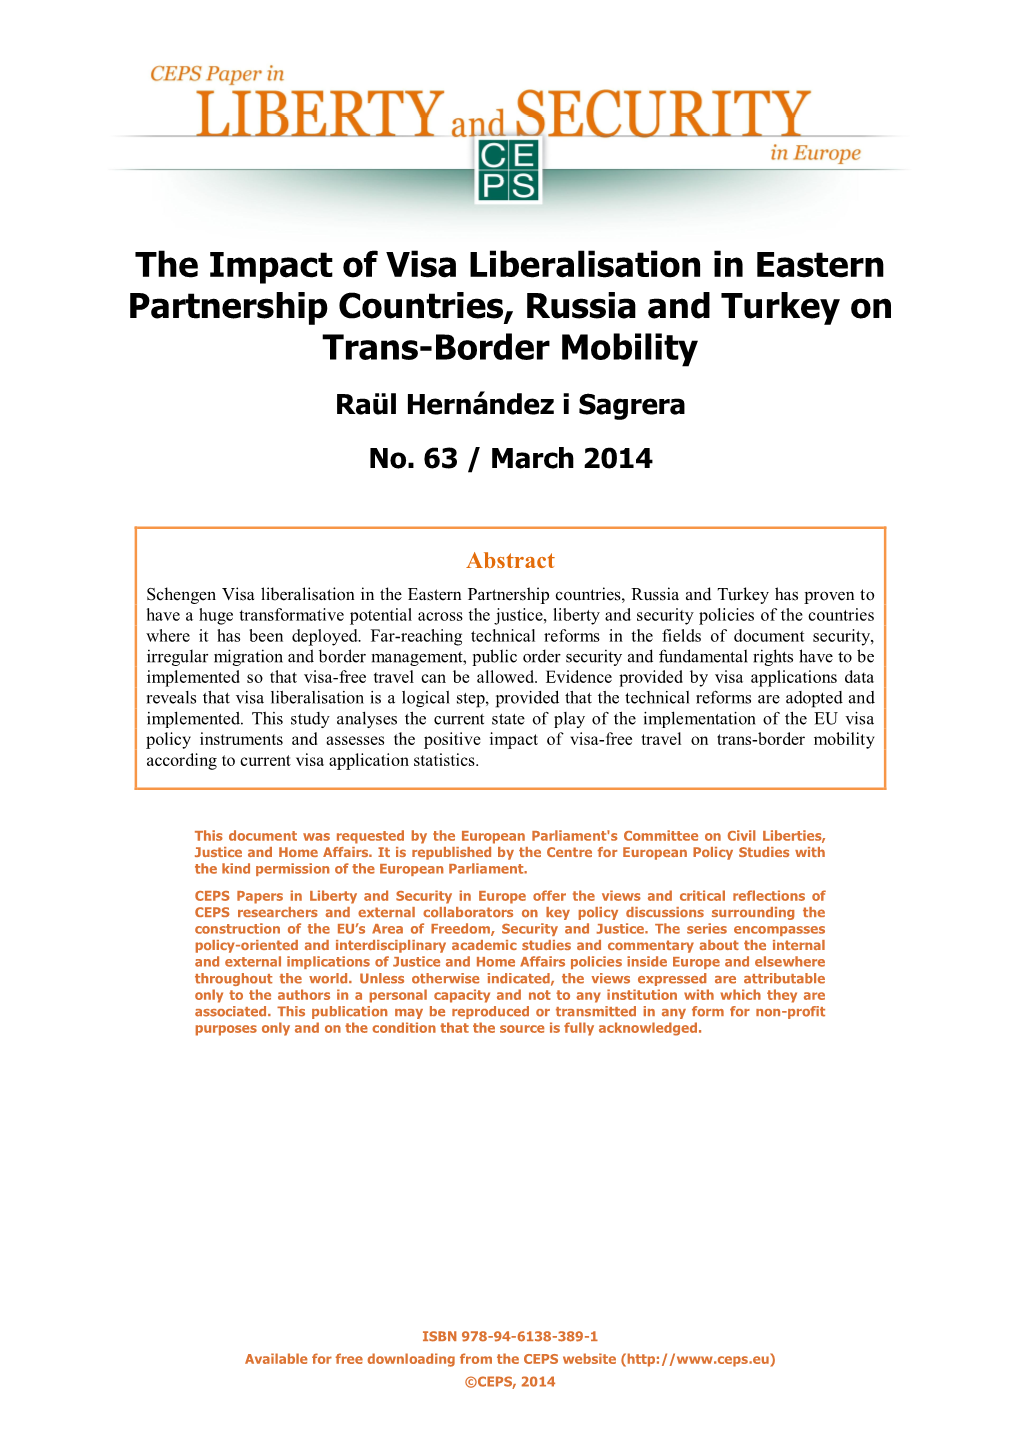 The Impact of Visa Liberalisation in Eastern Partnership Countries, Russia and Turkey on Trans-Border Mobility Raül Hernández I Sagrera No